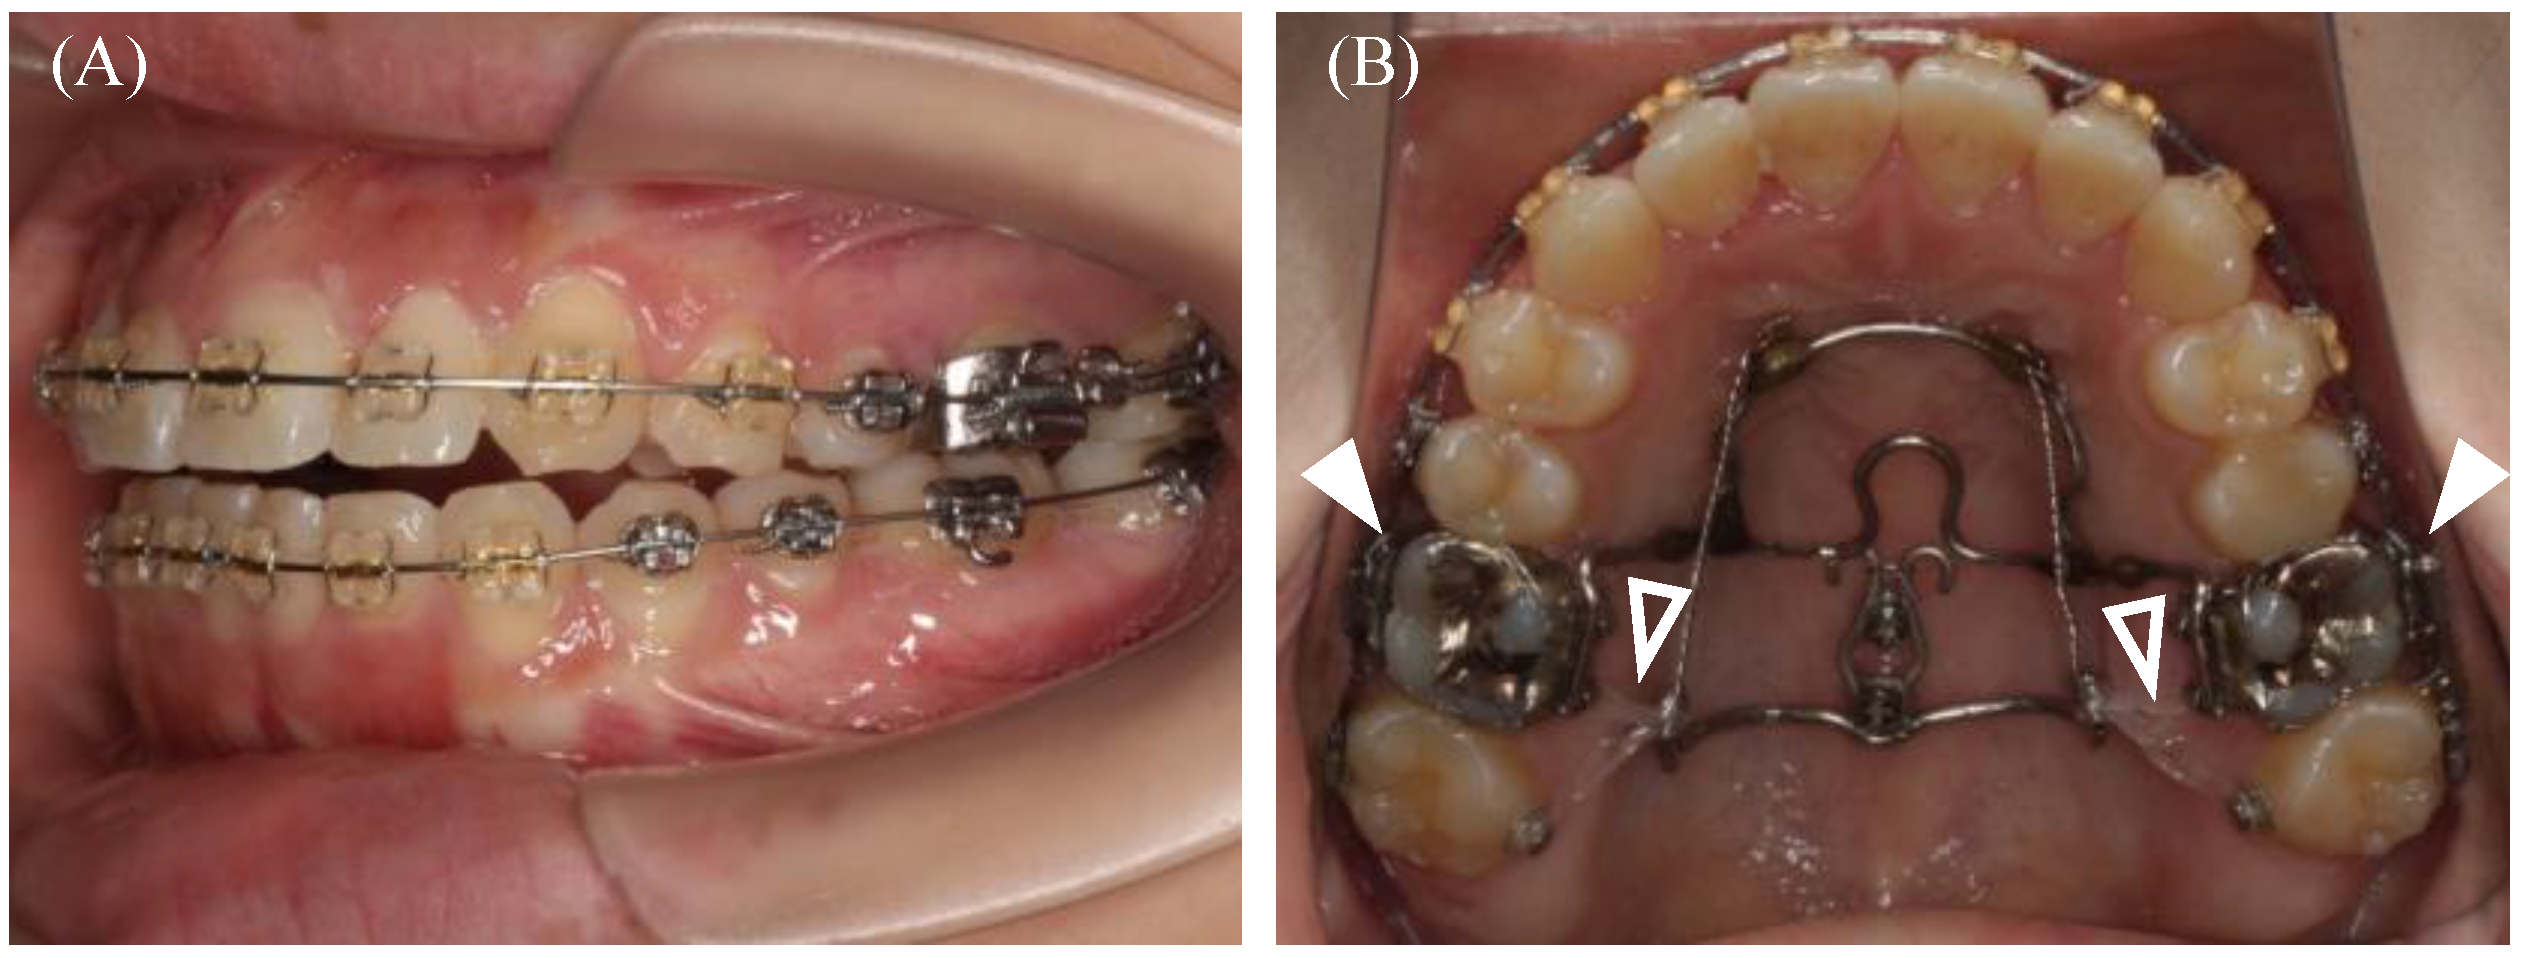 Placement of surgical hooks, completion of presurgical orthodontics.